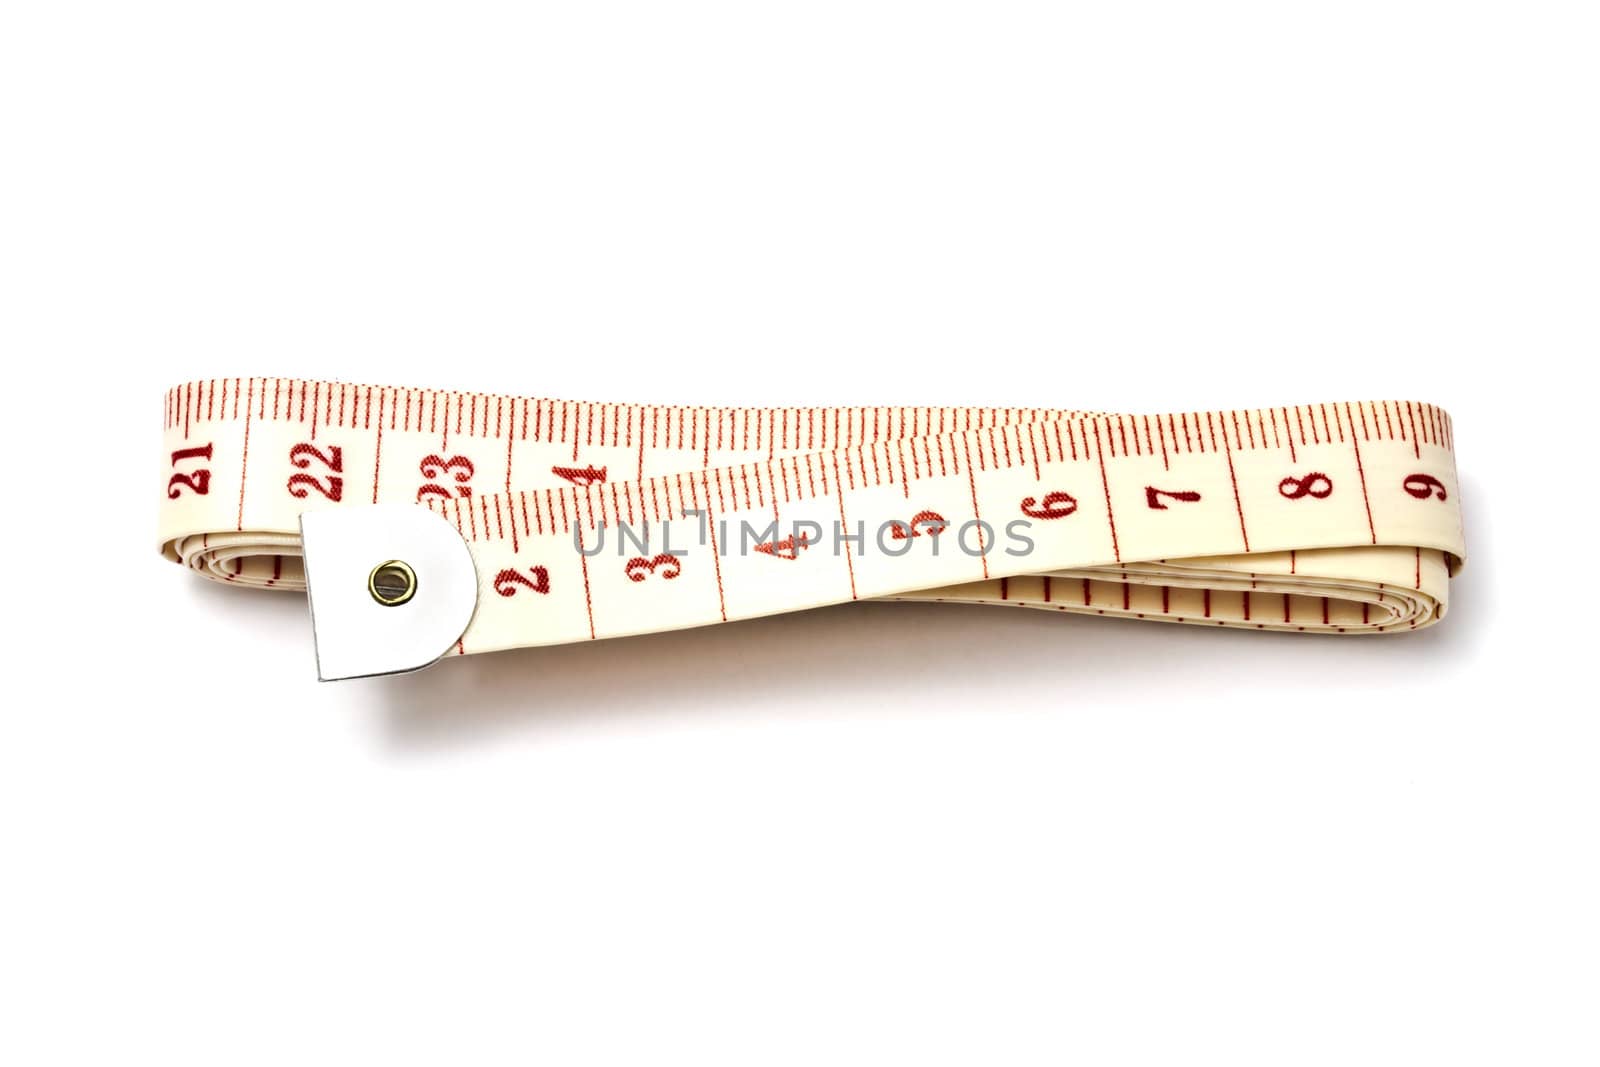  Tape measure  by ibphoto